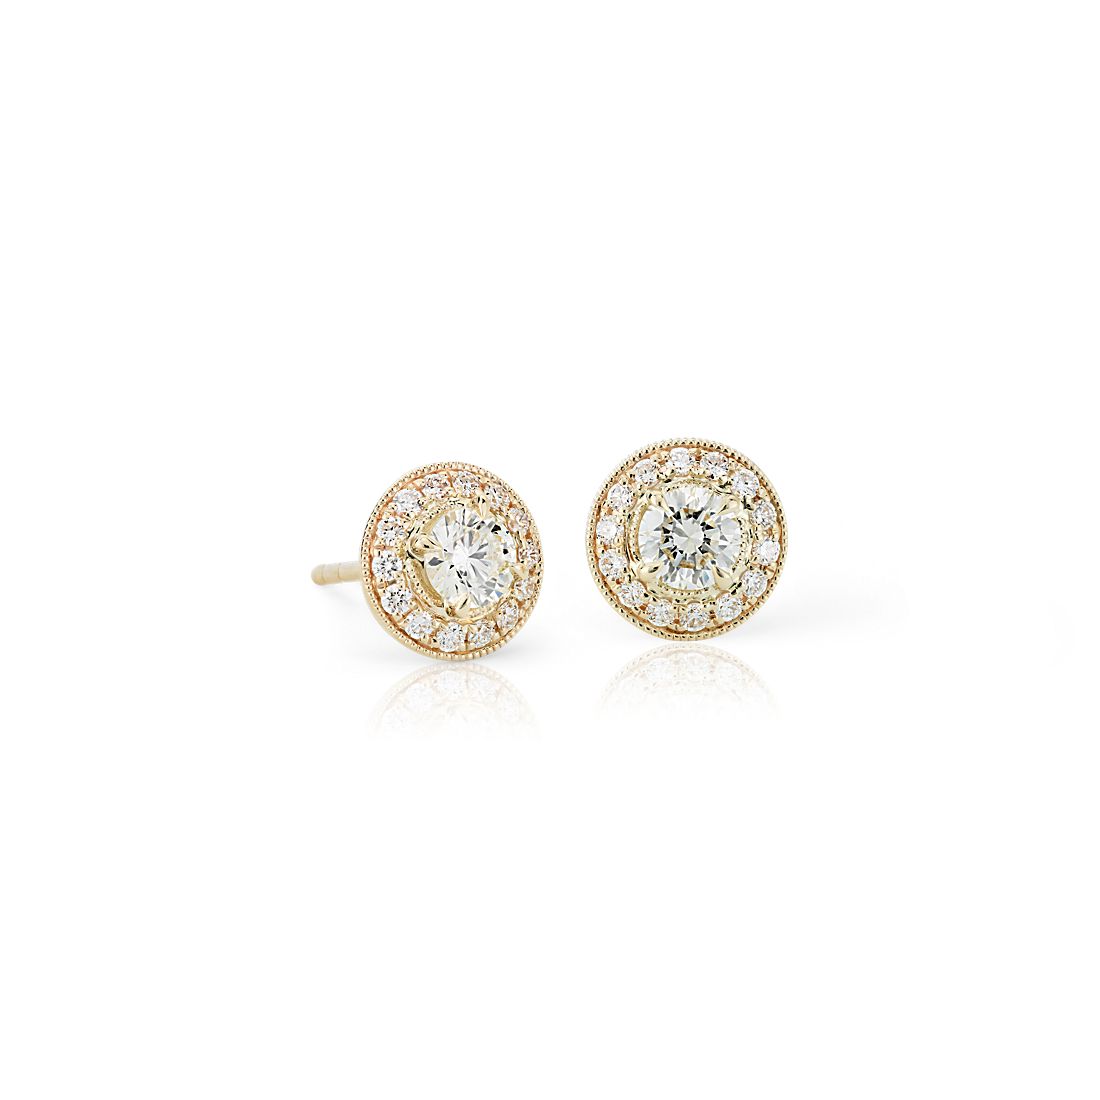 Vintage-Inspired Halo Diamond Stud Earrings in 14k Yellow Gold (3/4 ct. tw.)